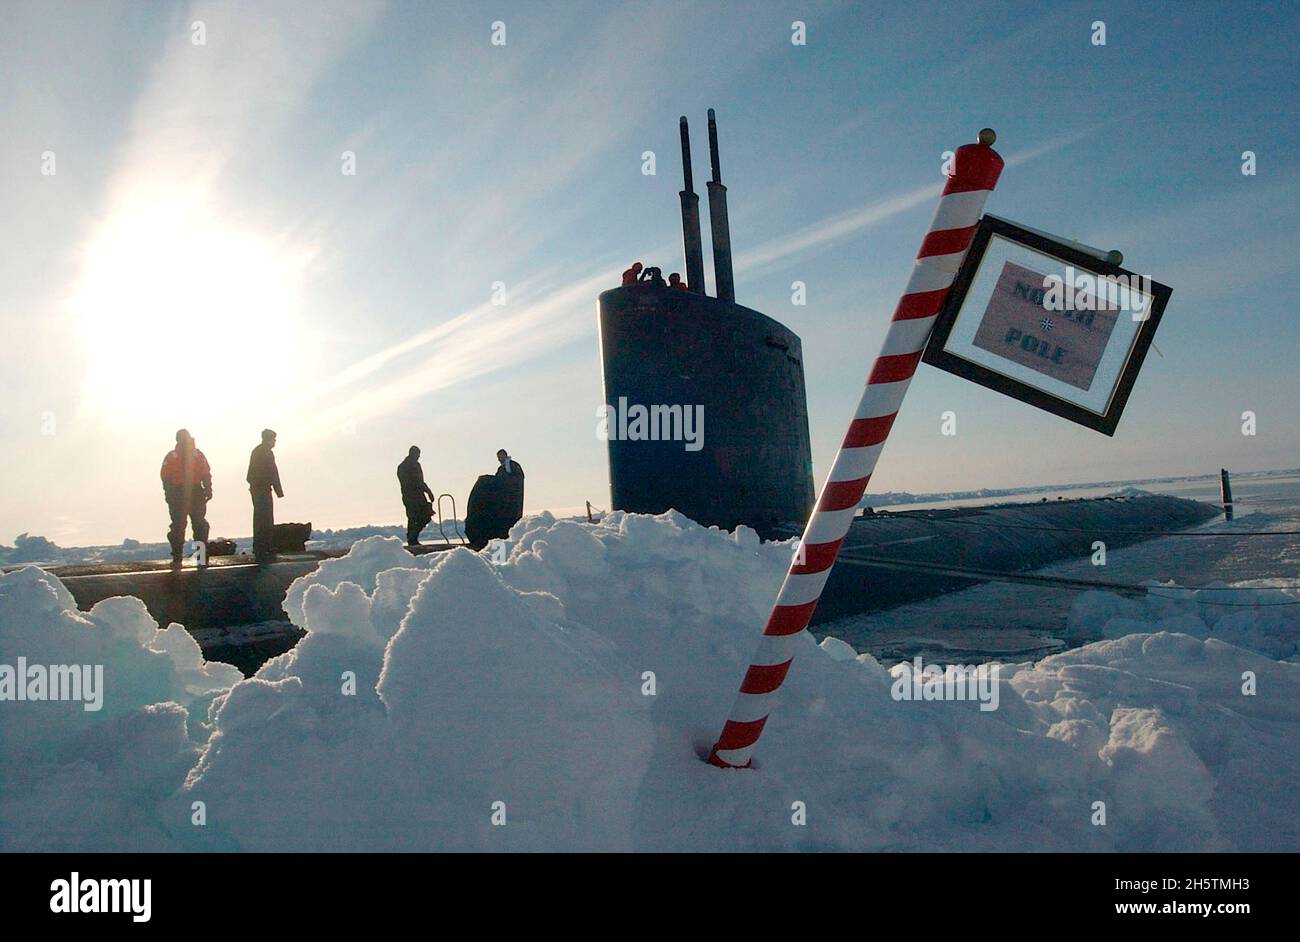 Crews with the U.S. Navy Los Angeles-class attack submarine USS Hampton and British Royal Navy Trafalgar class attack submarine HMS Tireless meets next to a sign indicating the North Pole after surfacing together May 3, 2004 at the North Pole. The Tireless and the Hampton were taking part in joint exercises ICEX 04, beneath the polar ice cap. Stock Photo